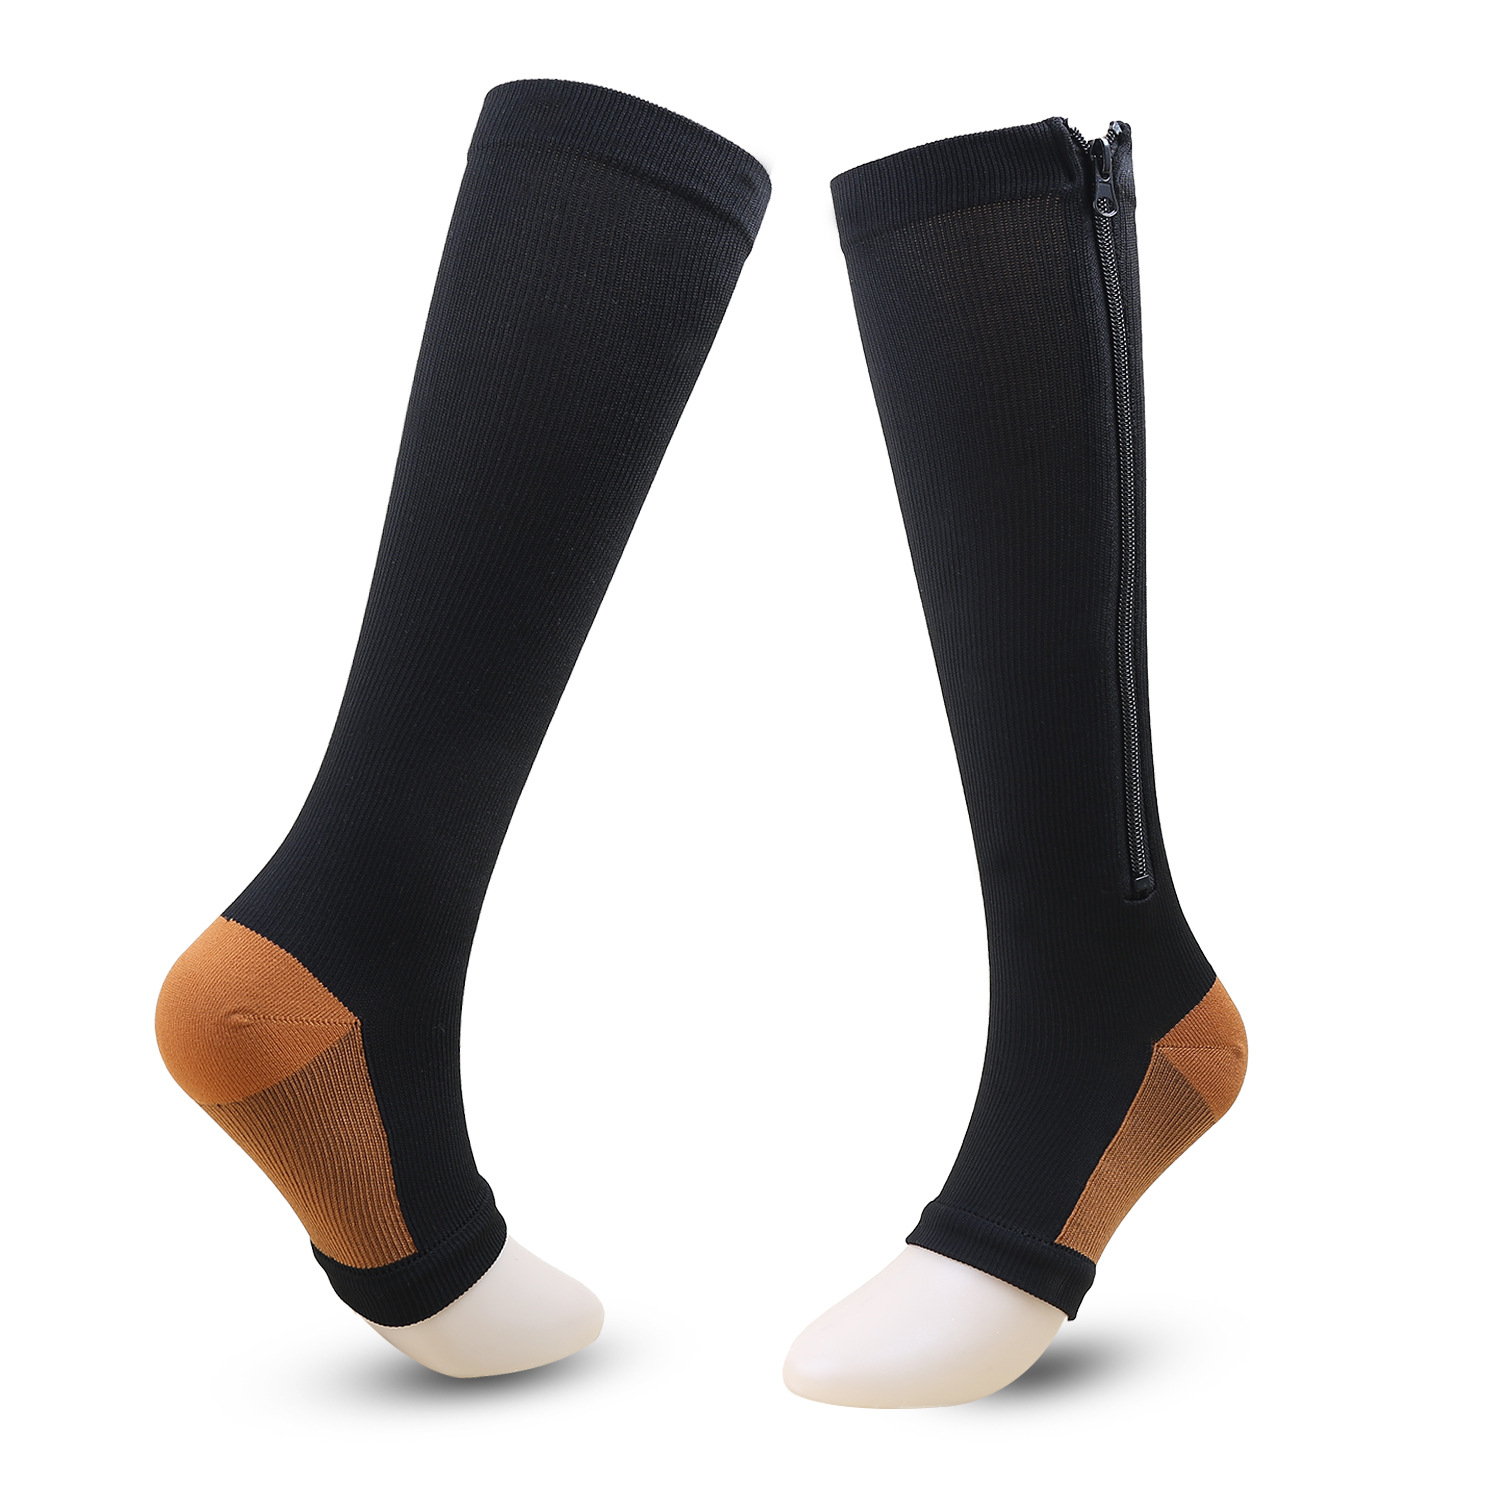 ZIP SOCKS Therapeutic Anti-Fatigue Compression Socks (BLACK or BEIGE) Foot  Leg Pain Relief Solid Miracle Anti Fatigue Magic Socks Knee High Stockings  UNISEX Zip Sox by Zamurra